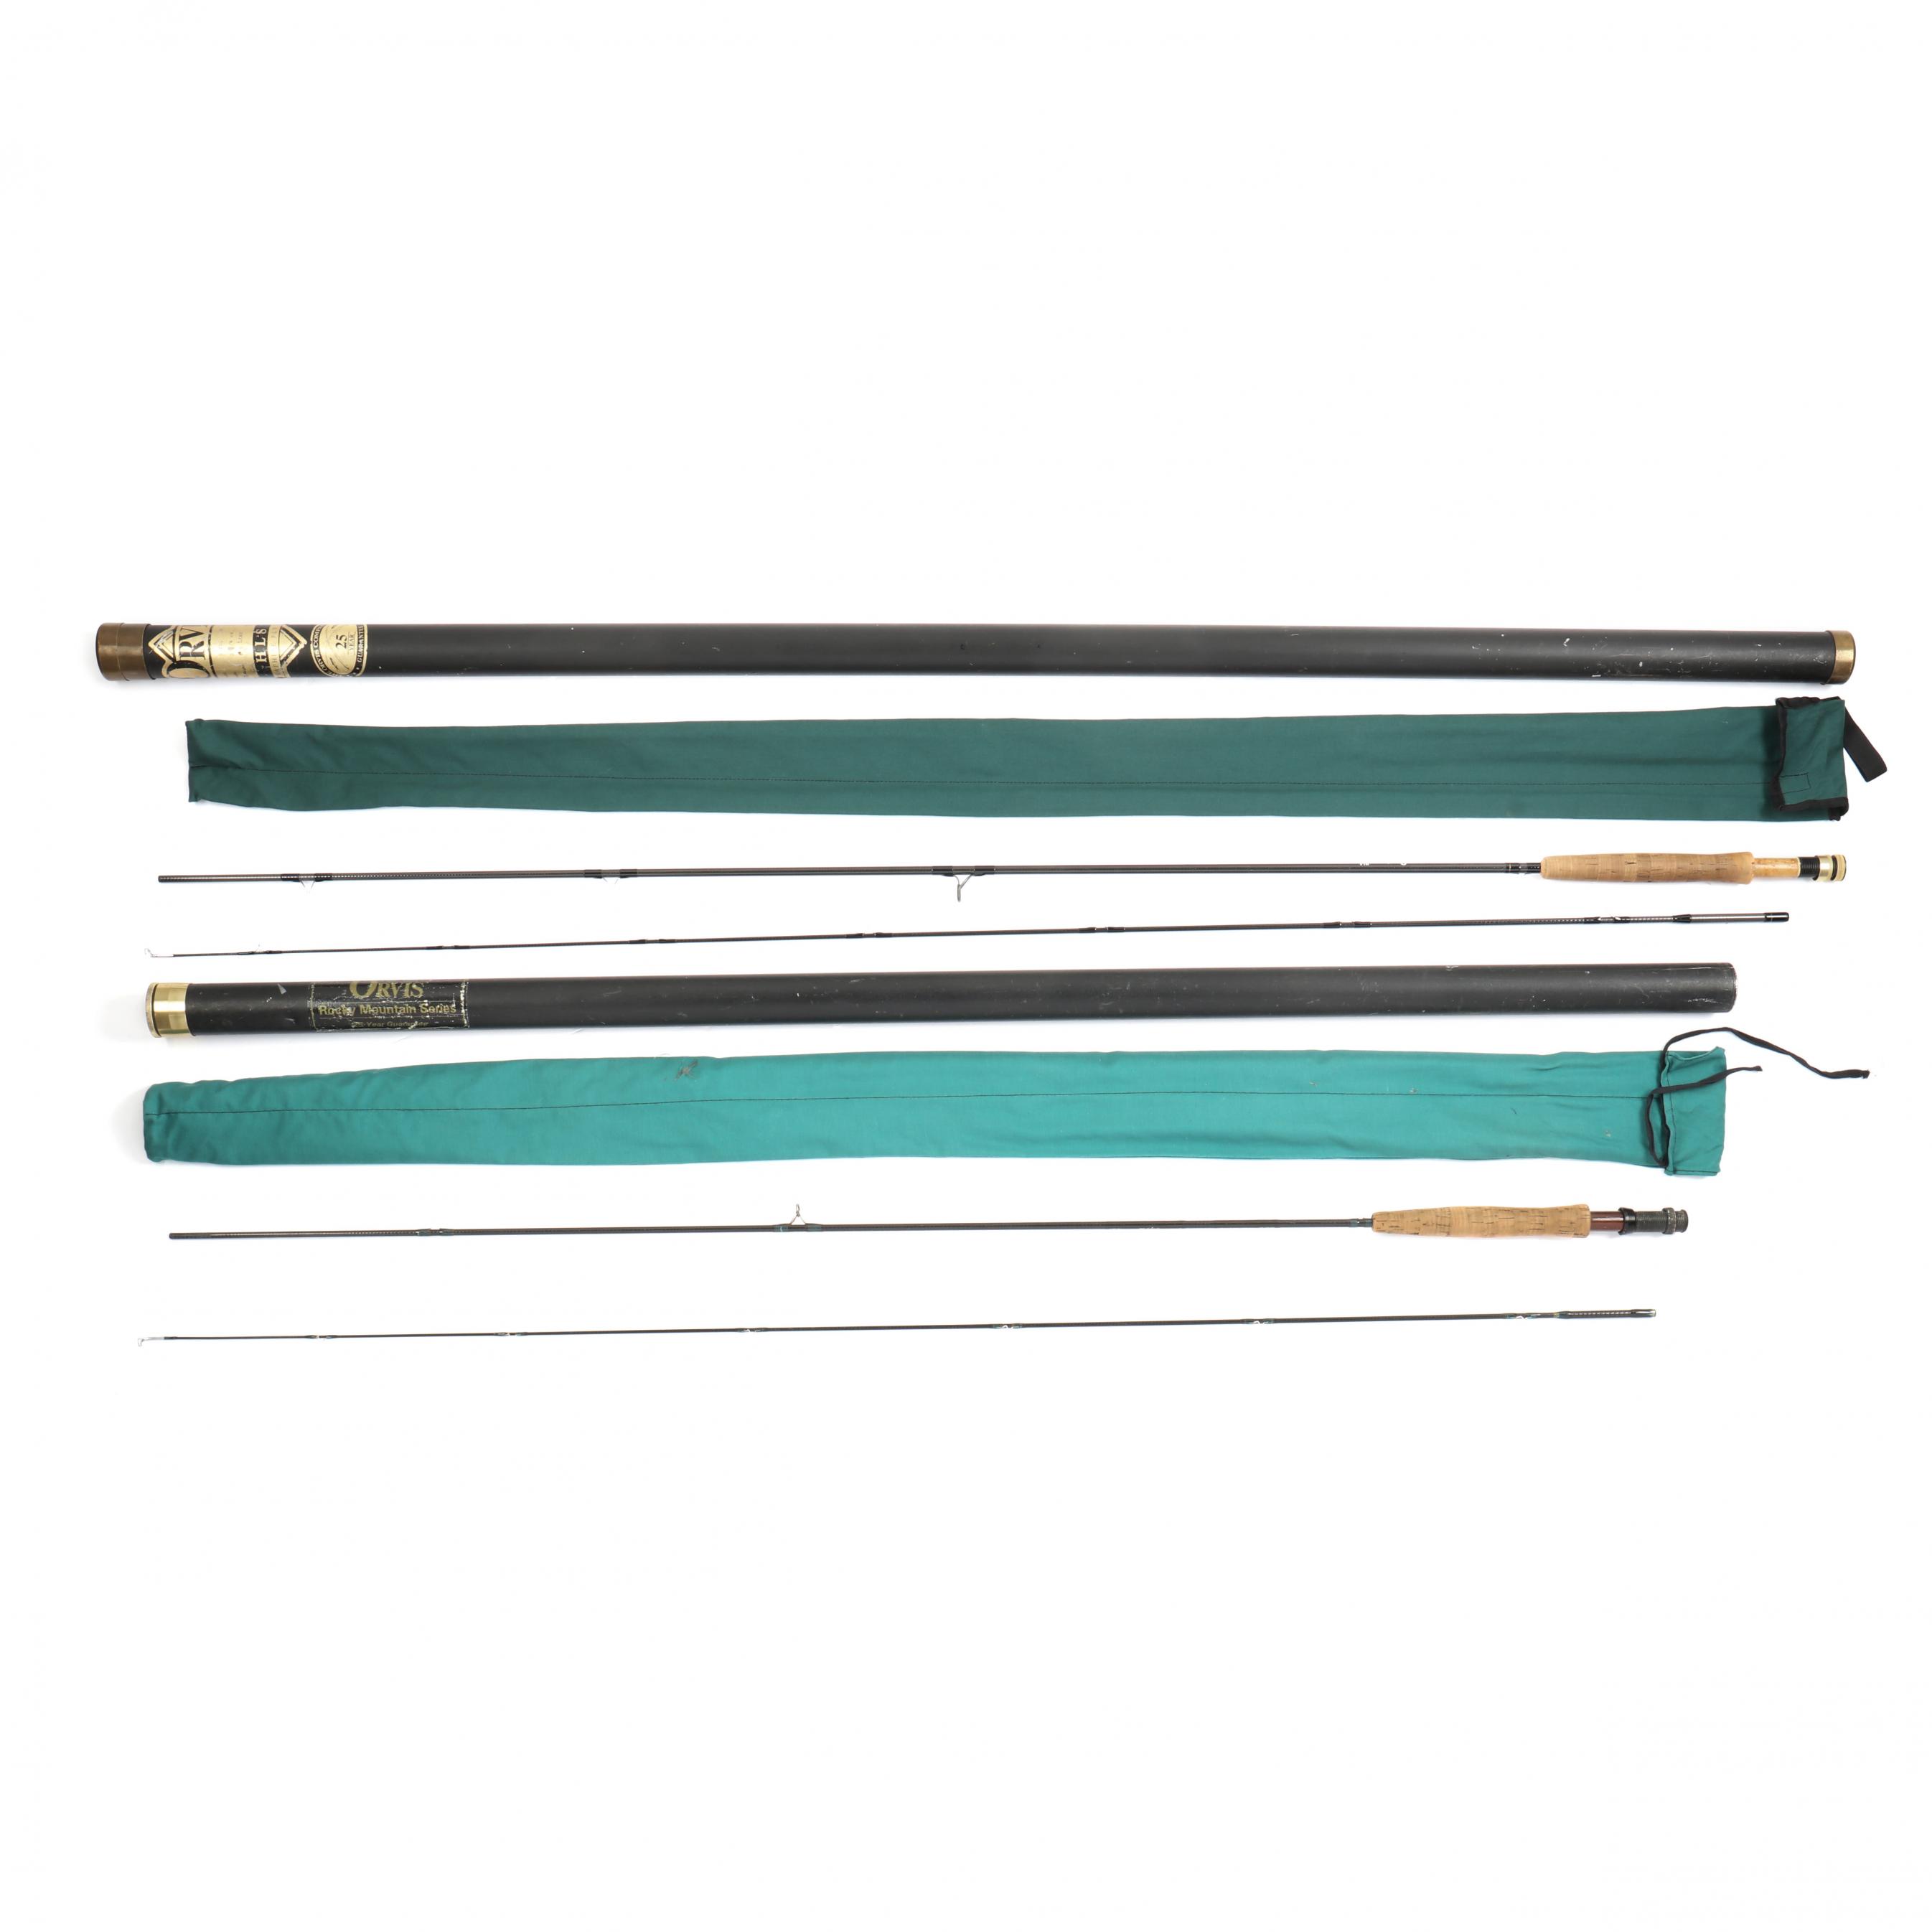 Pair of Orvis Graphite Fly Rods (Lot 3257 - Fall Sporting Art